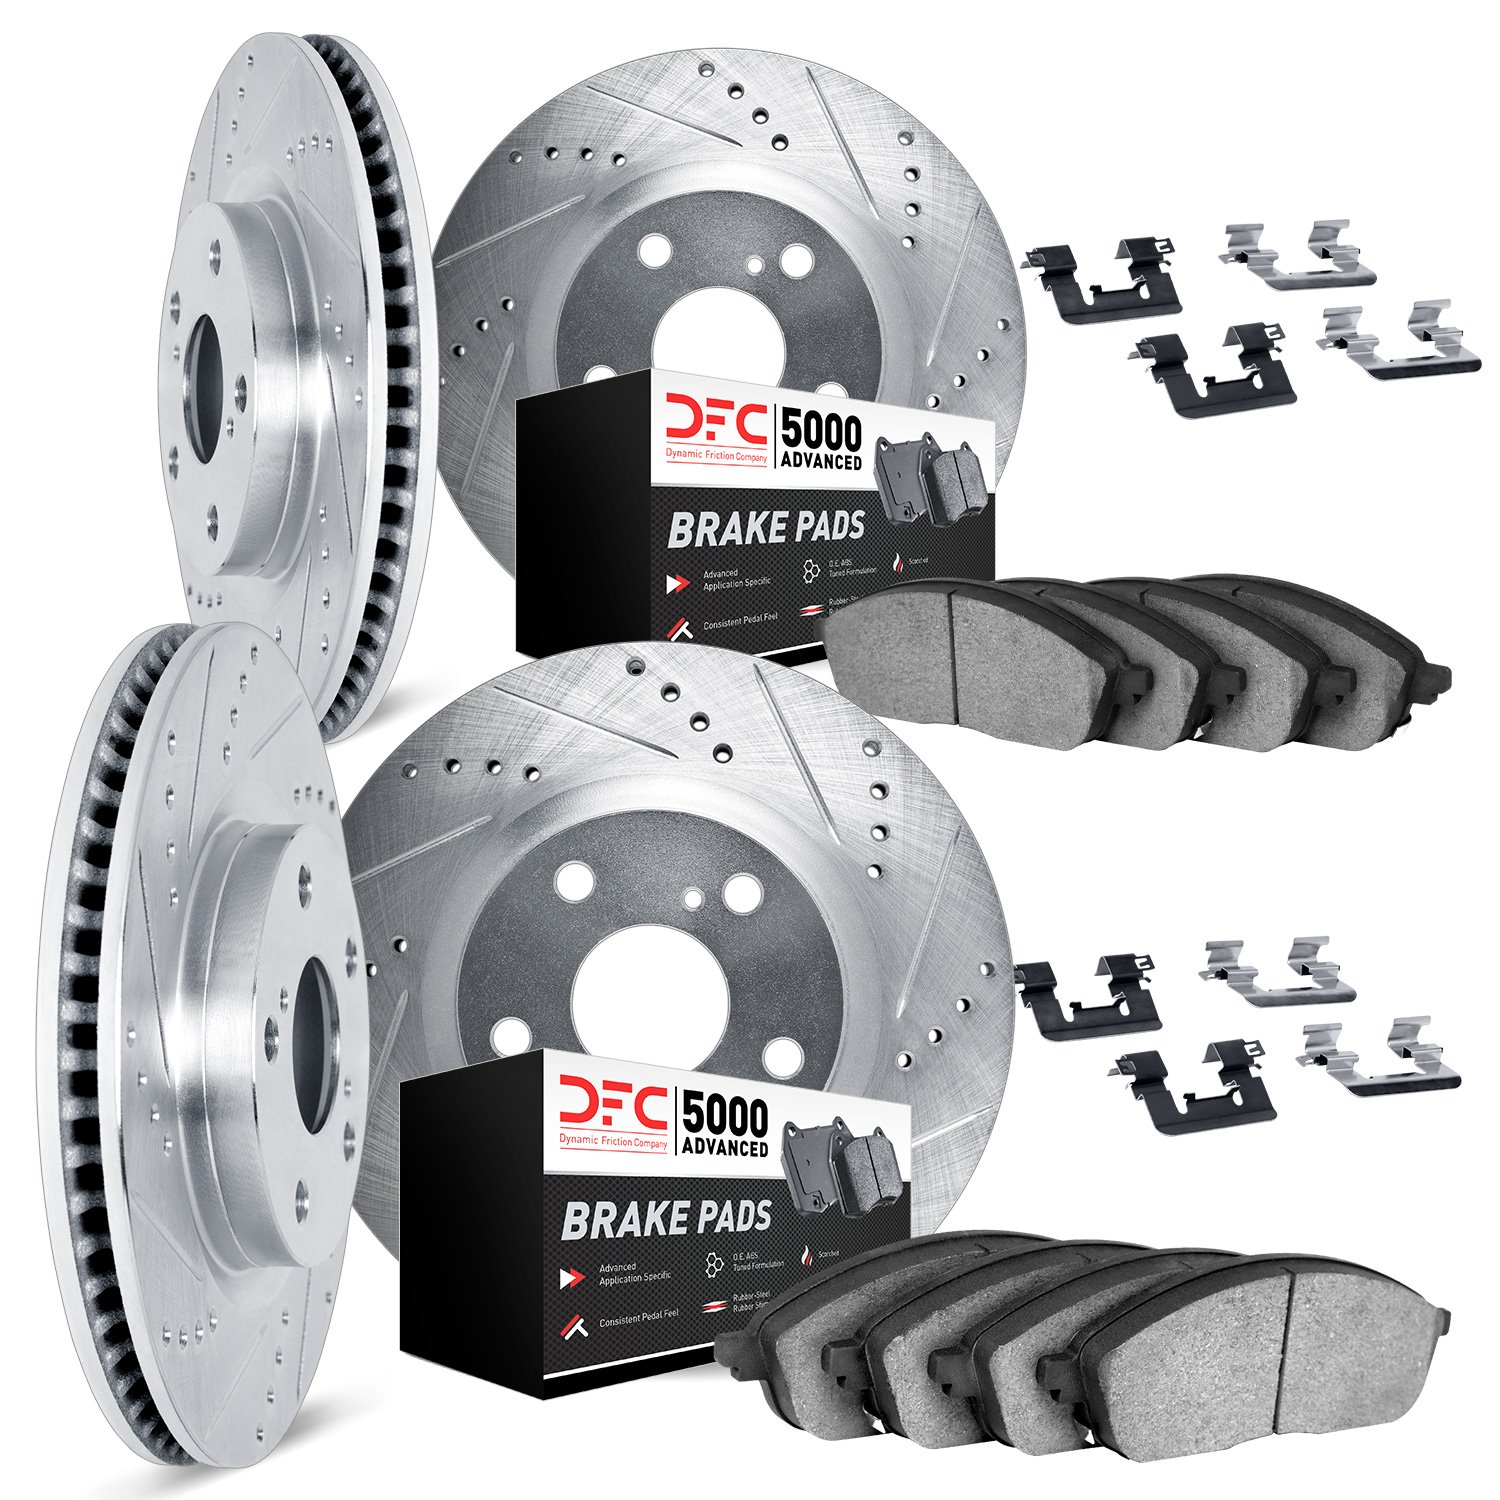 7514-42085 Drilled/Slotted Brake Rotors w/5000 Advanced Brake Pads Kit & Hardware [Silver], Fits Select Mopar, Position: Front a